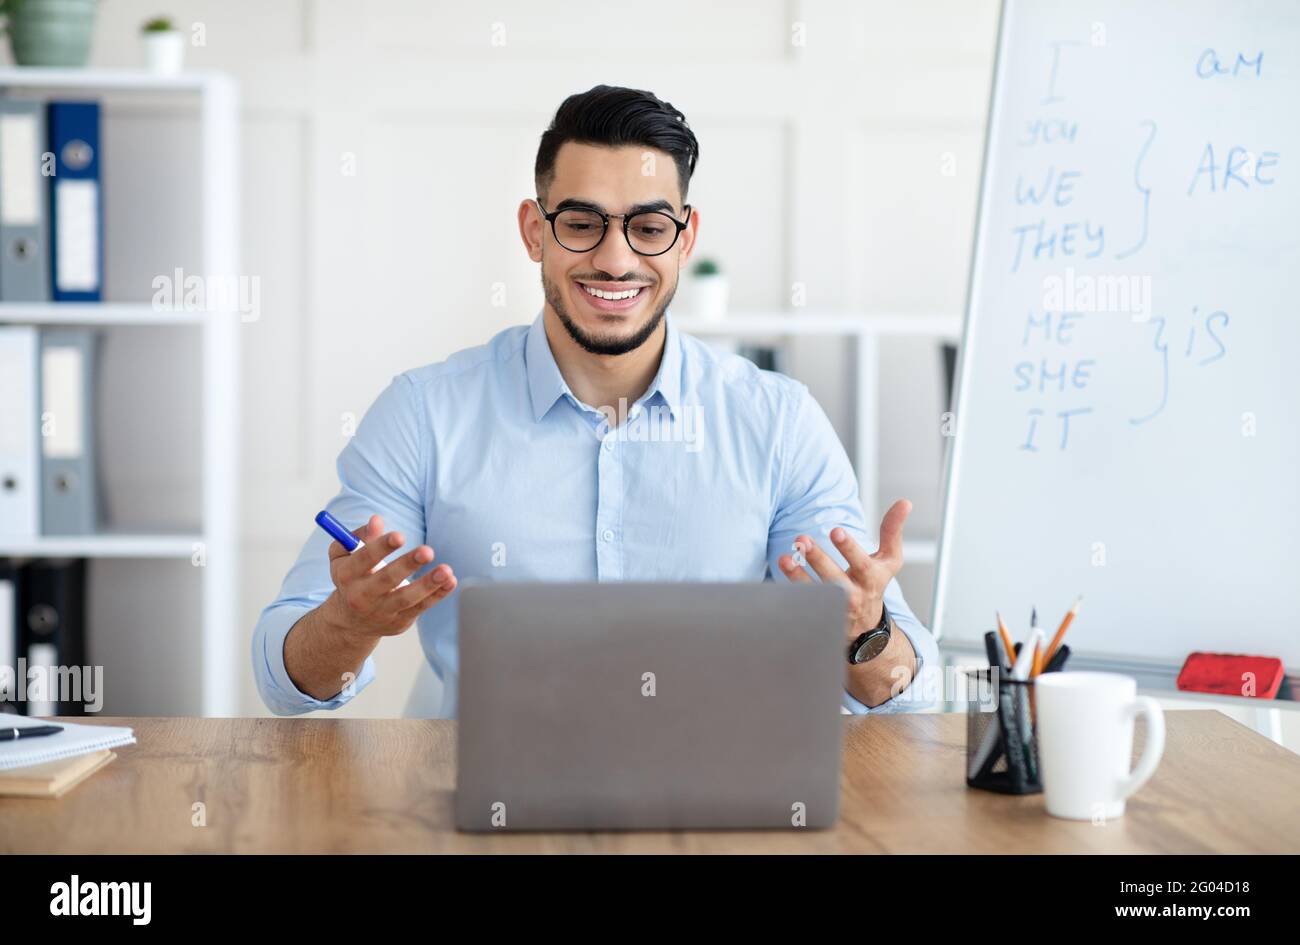 Online languages school. Arab male English teacher giving remote lesson on laptop computer at home office Stock Photo